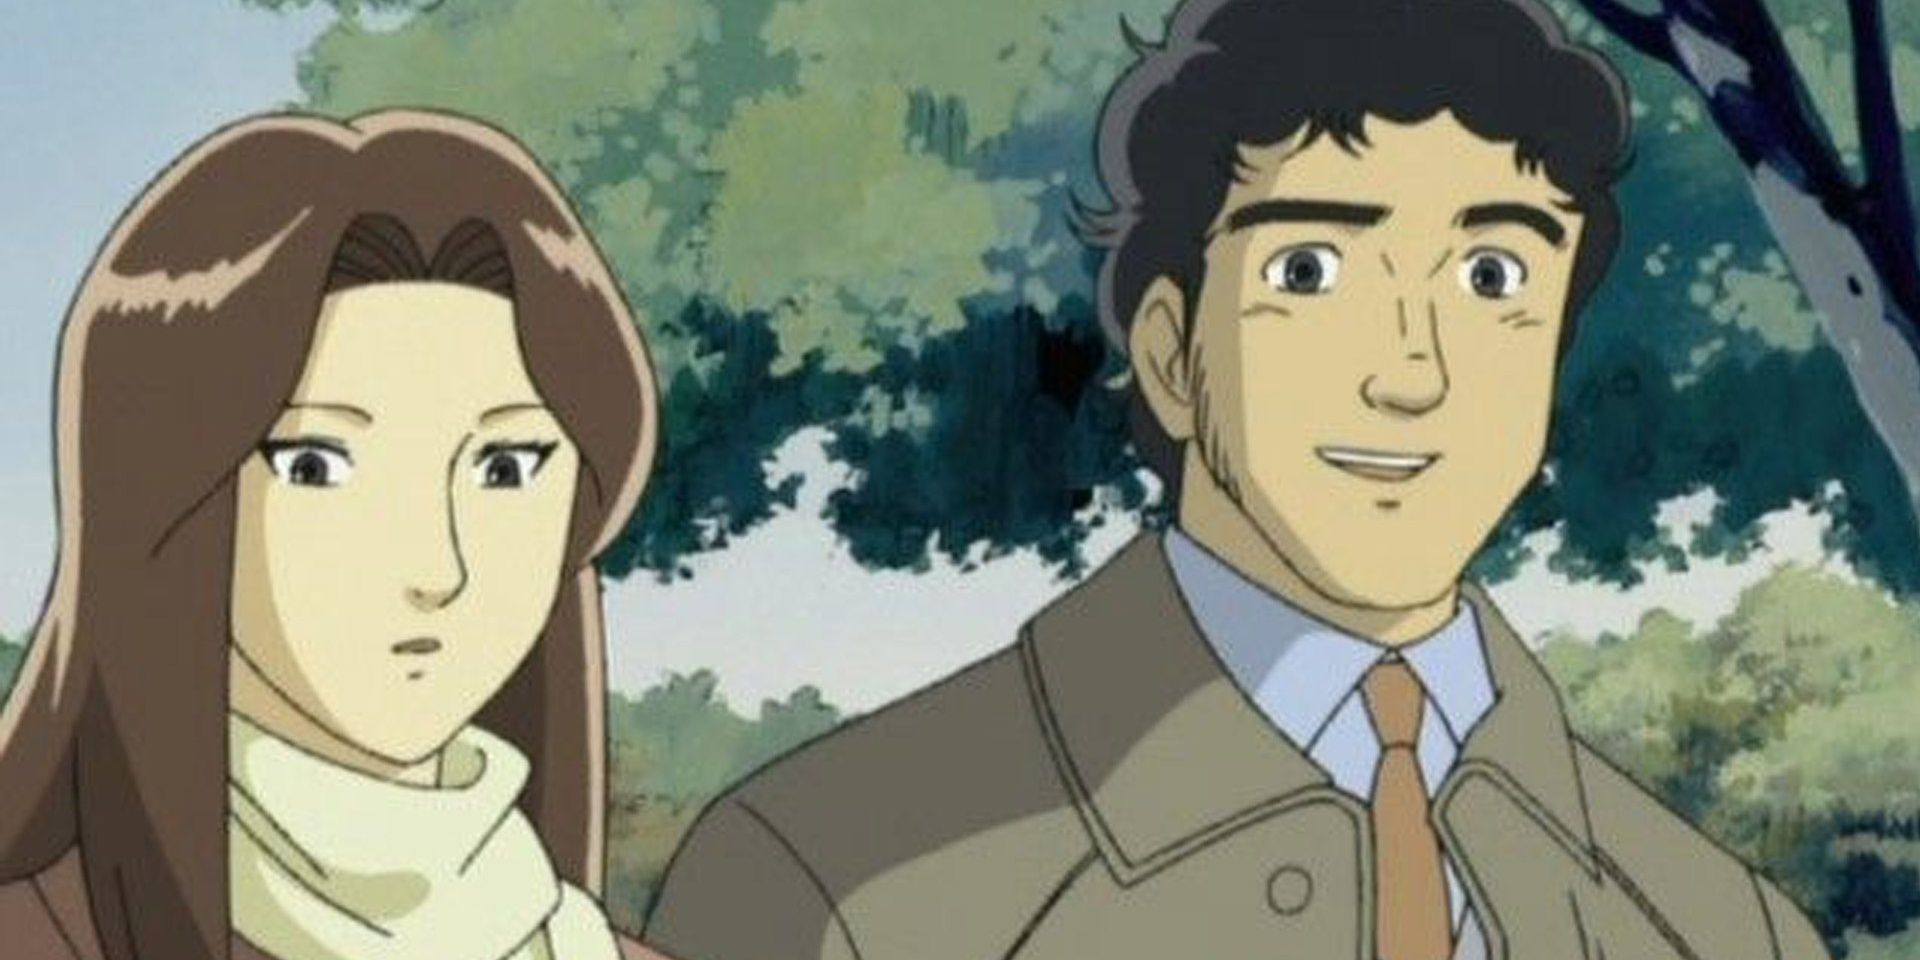 An image of characters from the anime Human Crossing.